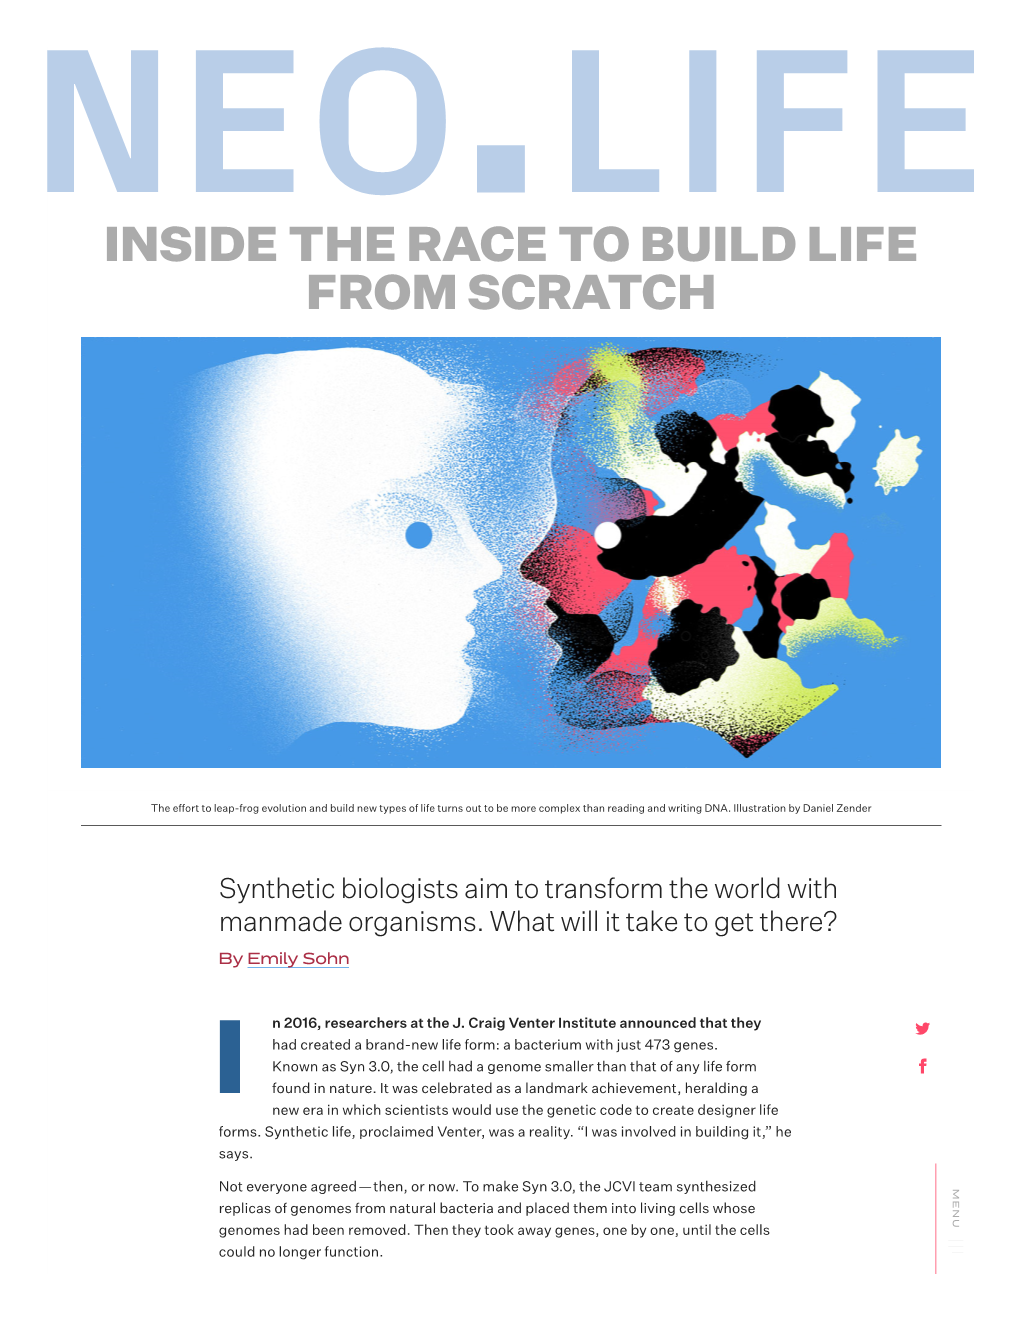 Inside the Race to Build Life from Scratch